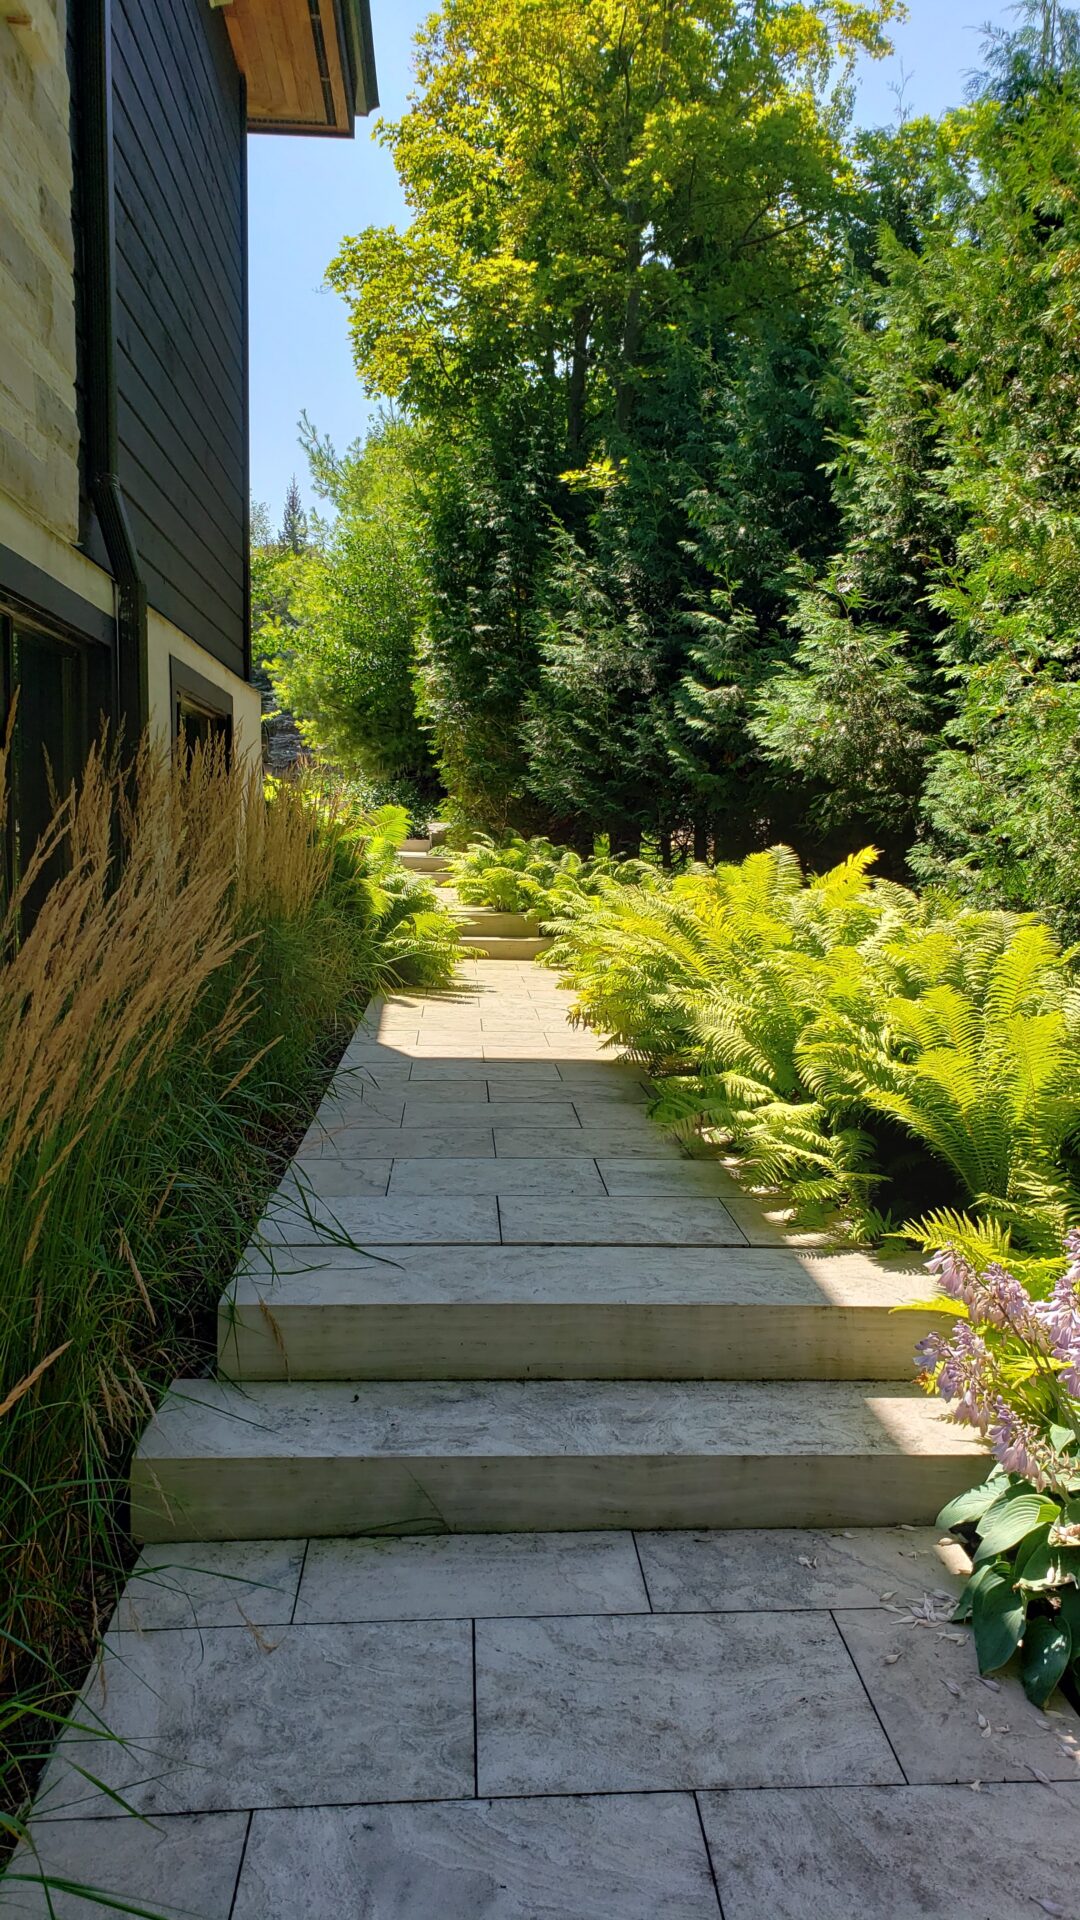 A serene outdoor pathway flanked by lush ferns, ornamental grasses, and trees, leading past a modern building under a bright blue sky.